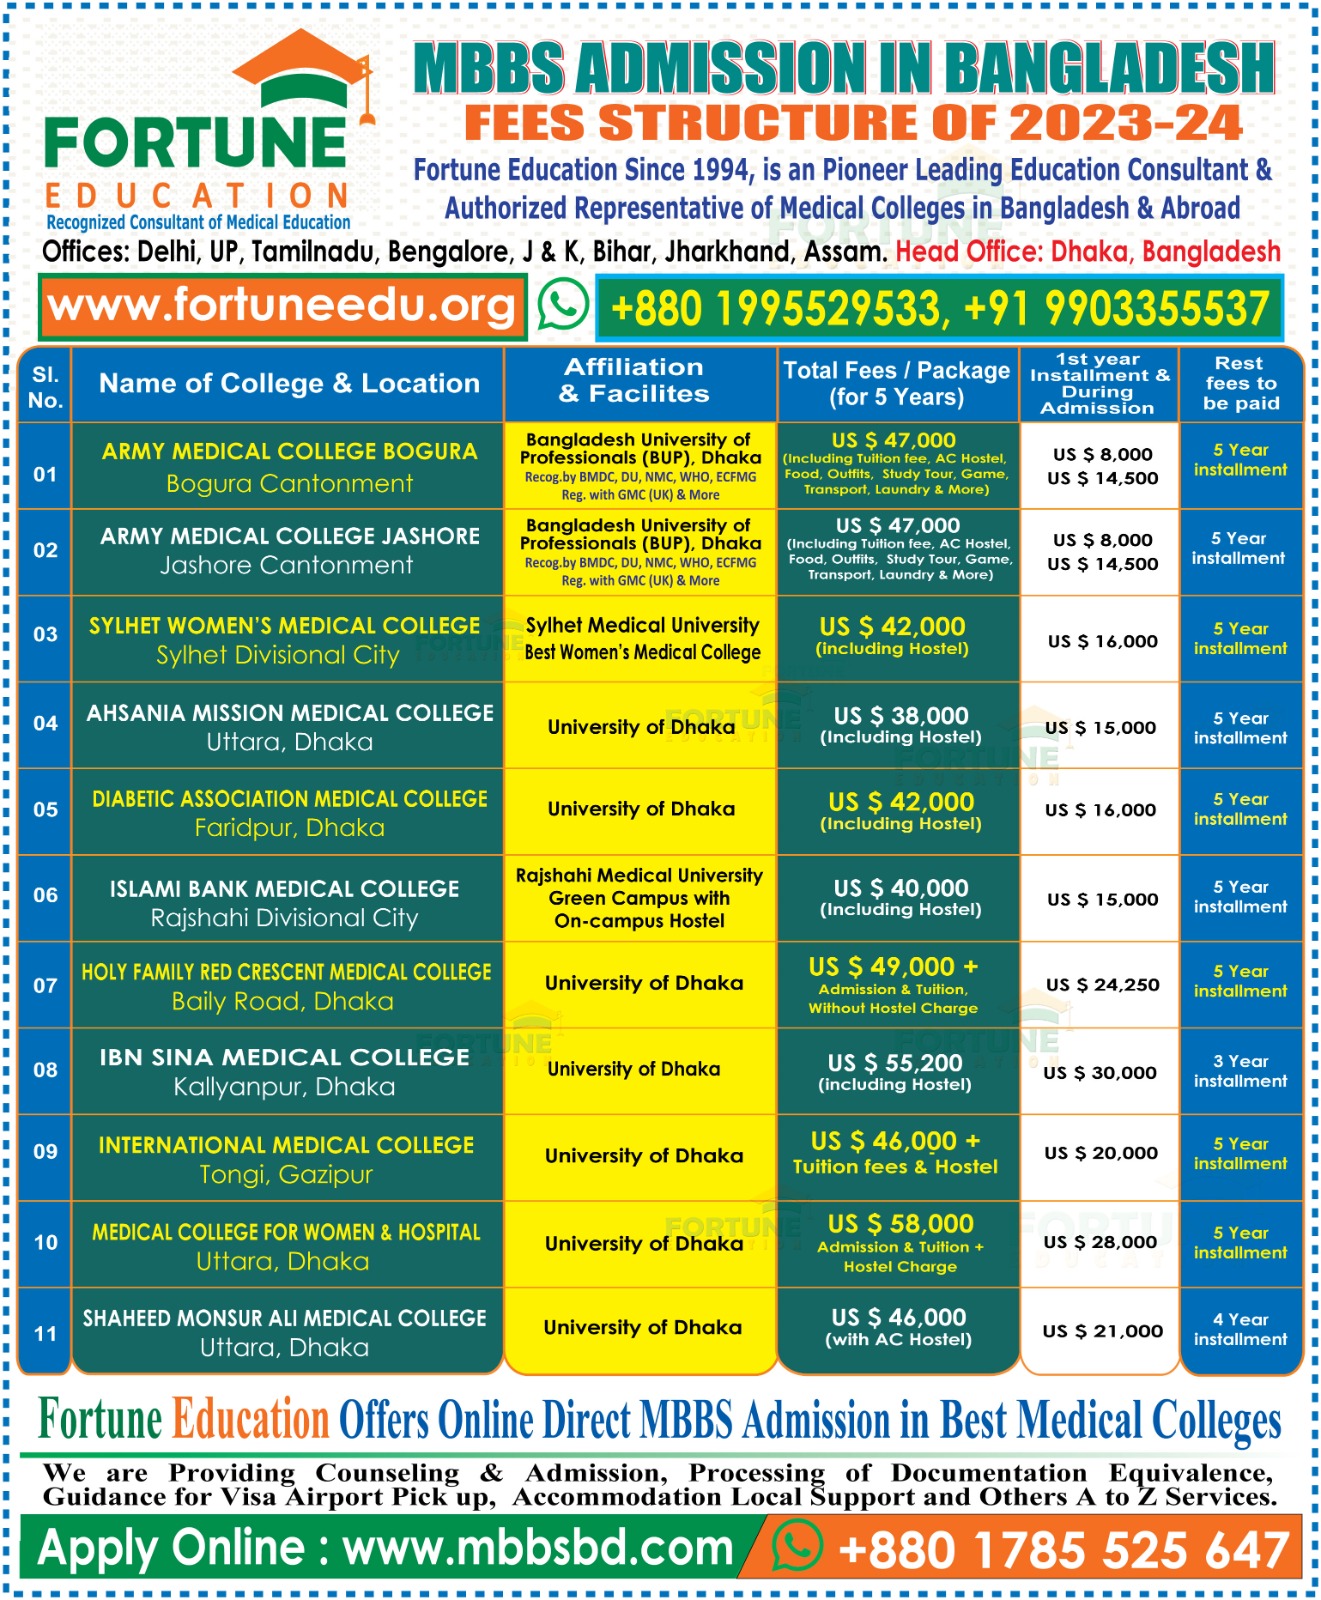 MBBS Fees Structure 2024